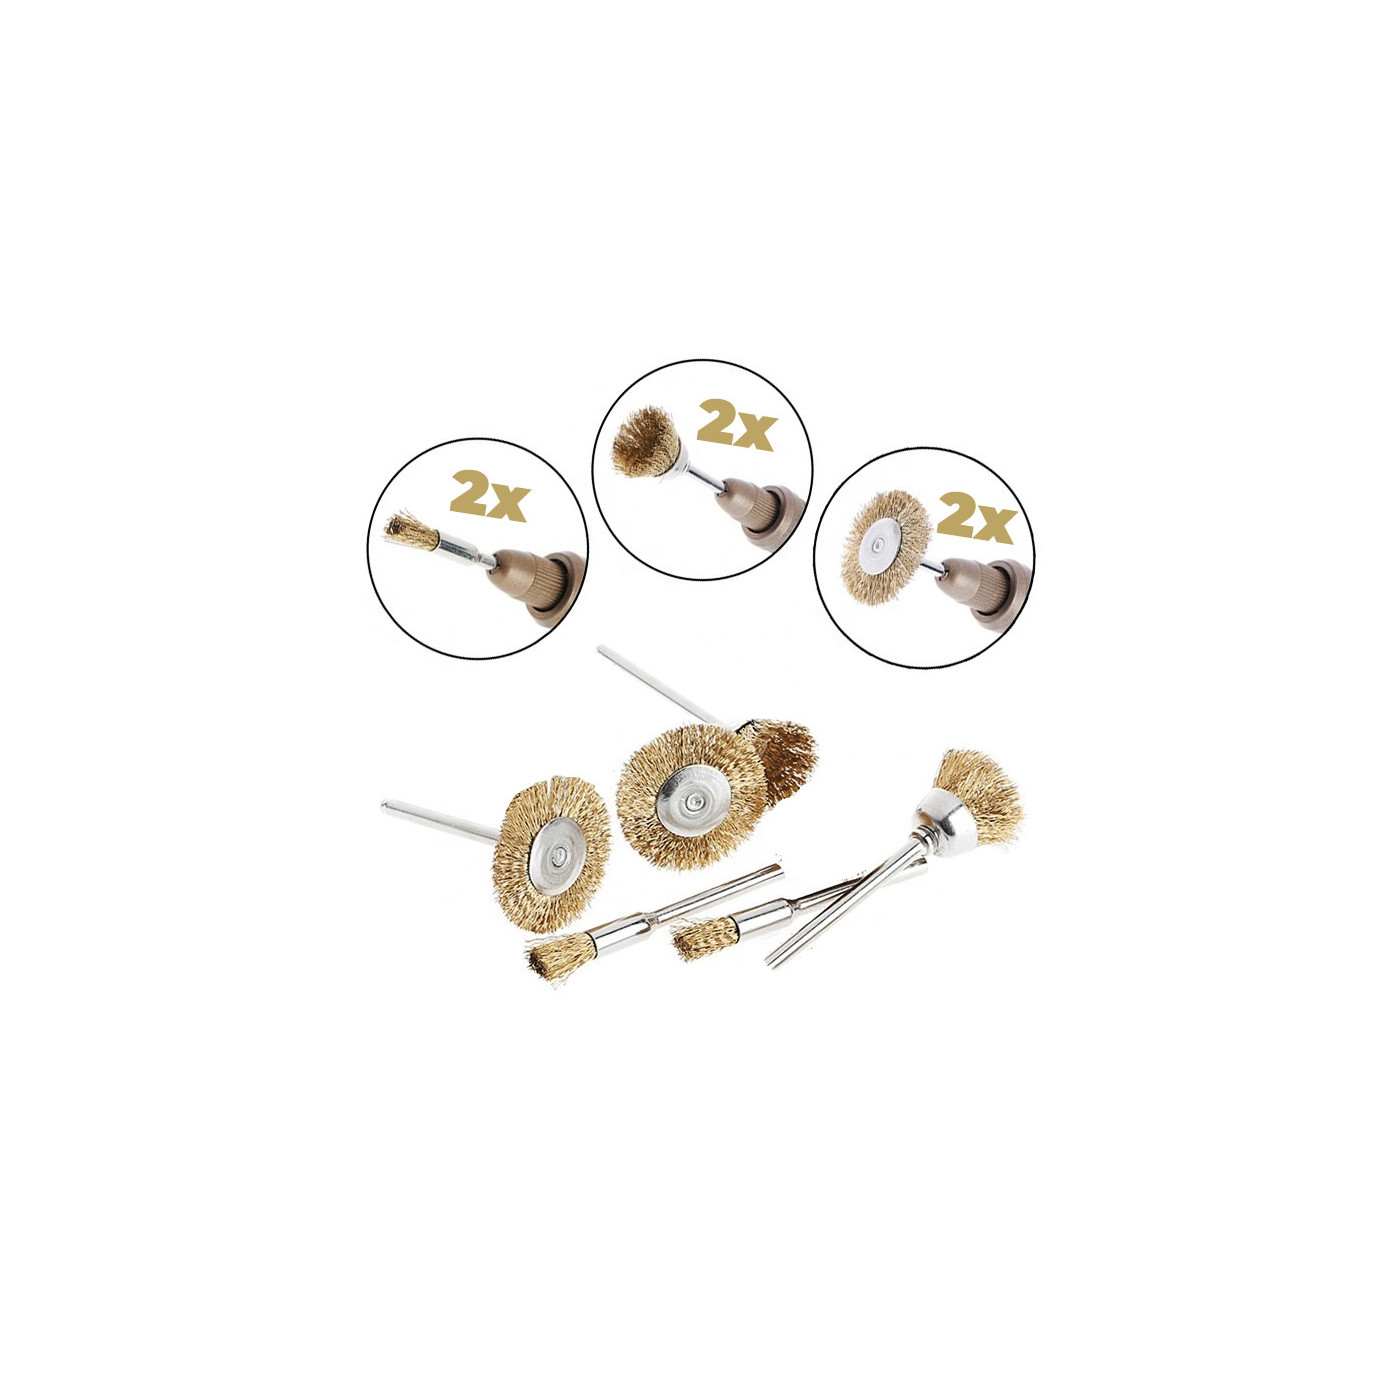 Mini metal wire brushes set (6 pieces, brass, for multitools)